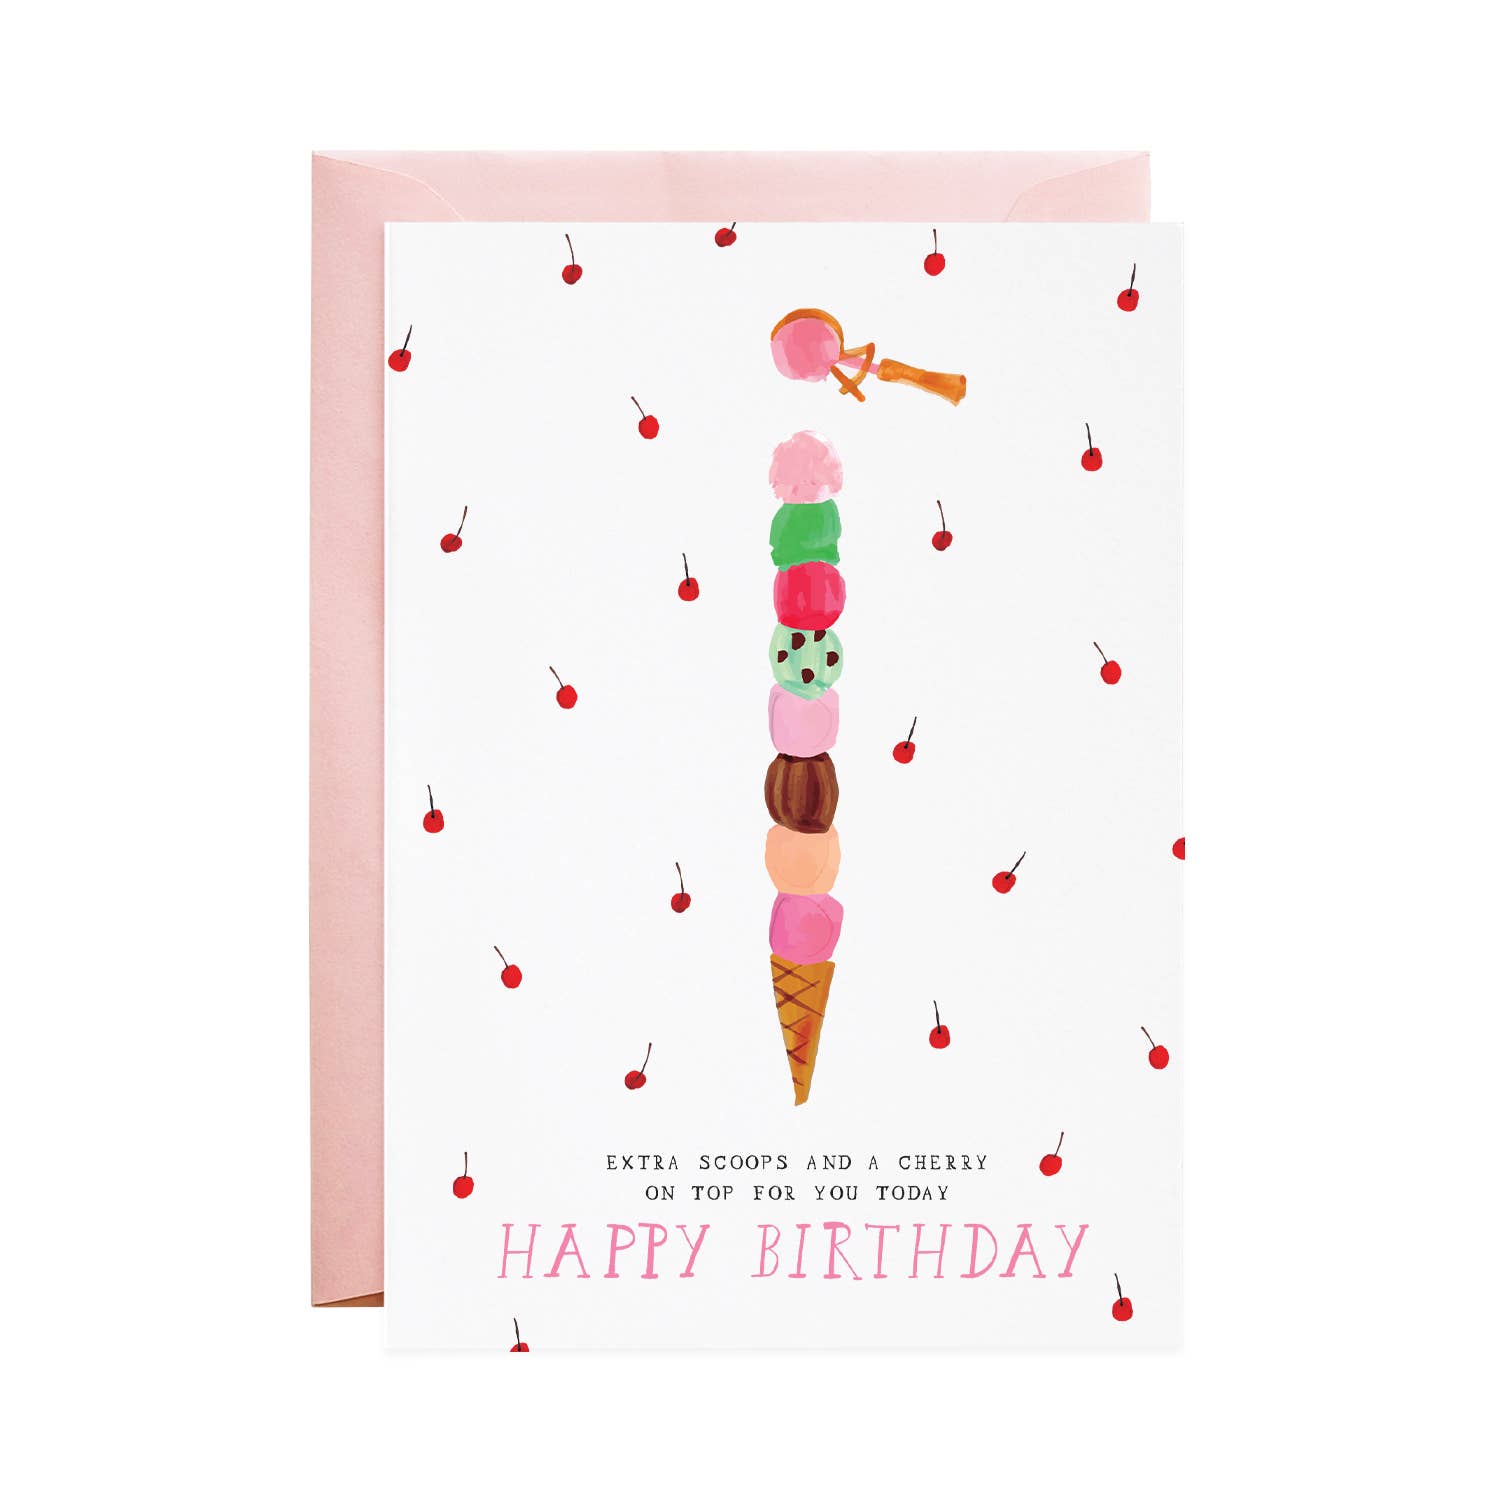 Birthday greeting card -- cherry background design  with 8 scoops of ice cream in a cone. It reads "Extra scoops and a cherry on top for you today. Happy Birthday!" 